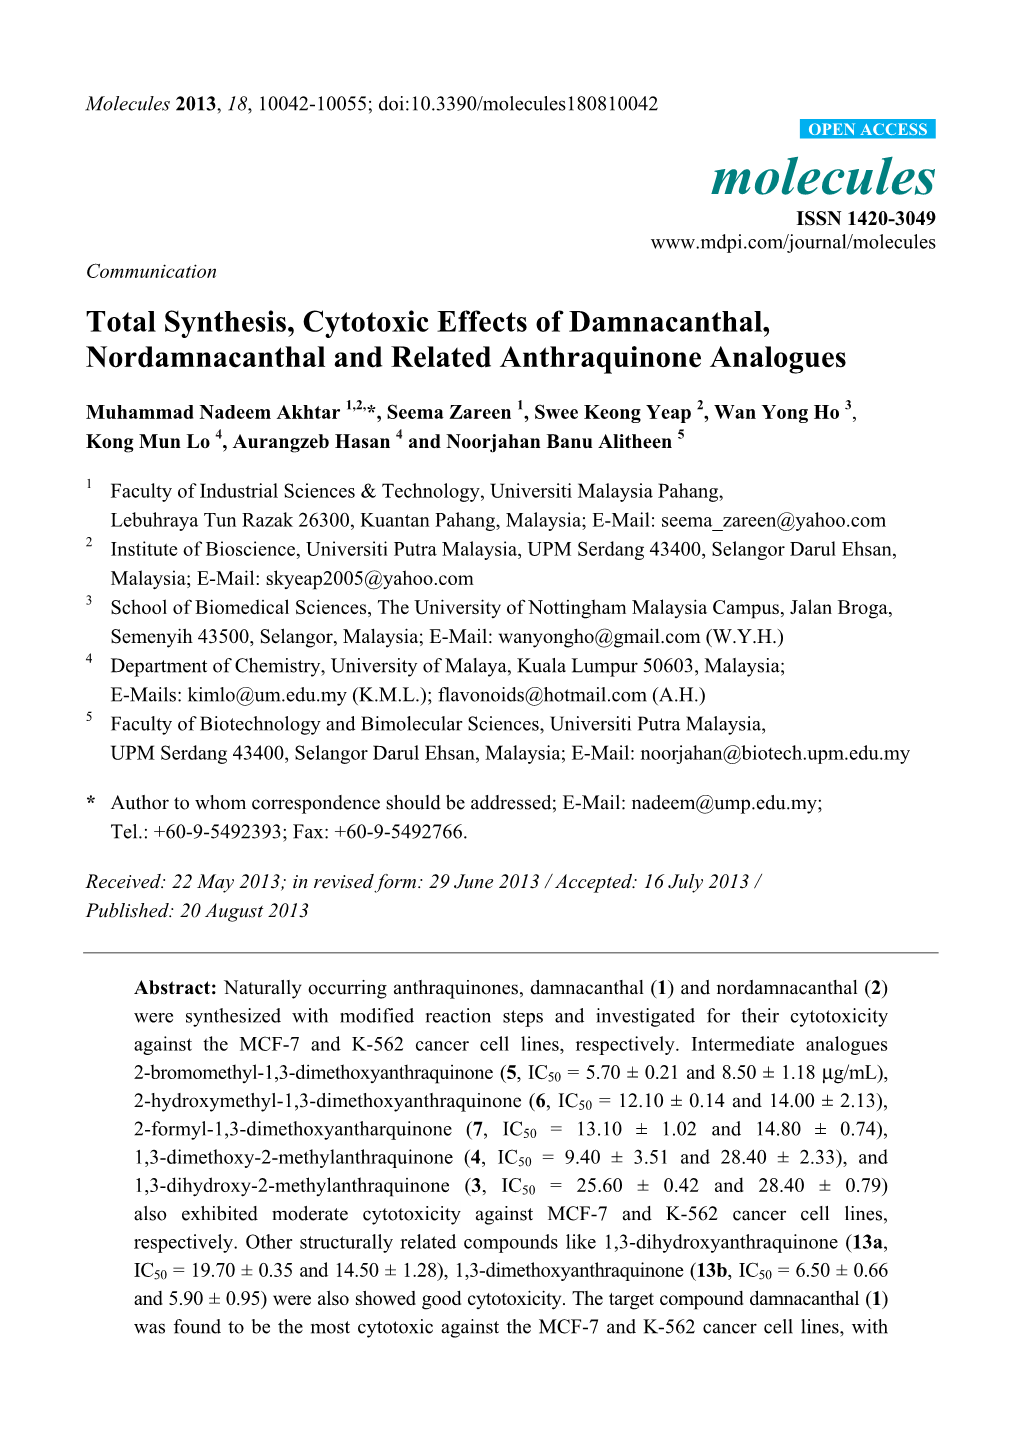 Total Synthesis, Cytotoxic Effects of Damnacanthal, Nordamnacanthal and Related Anthraquinone Analogues